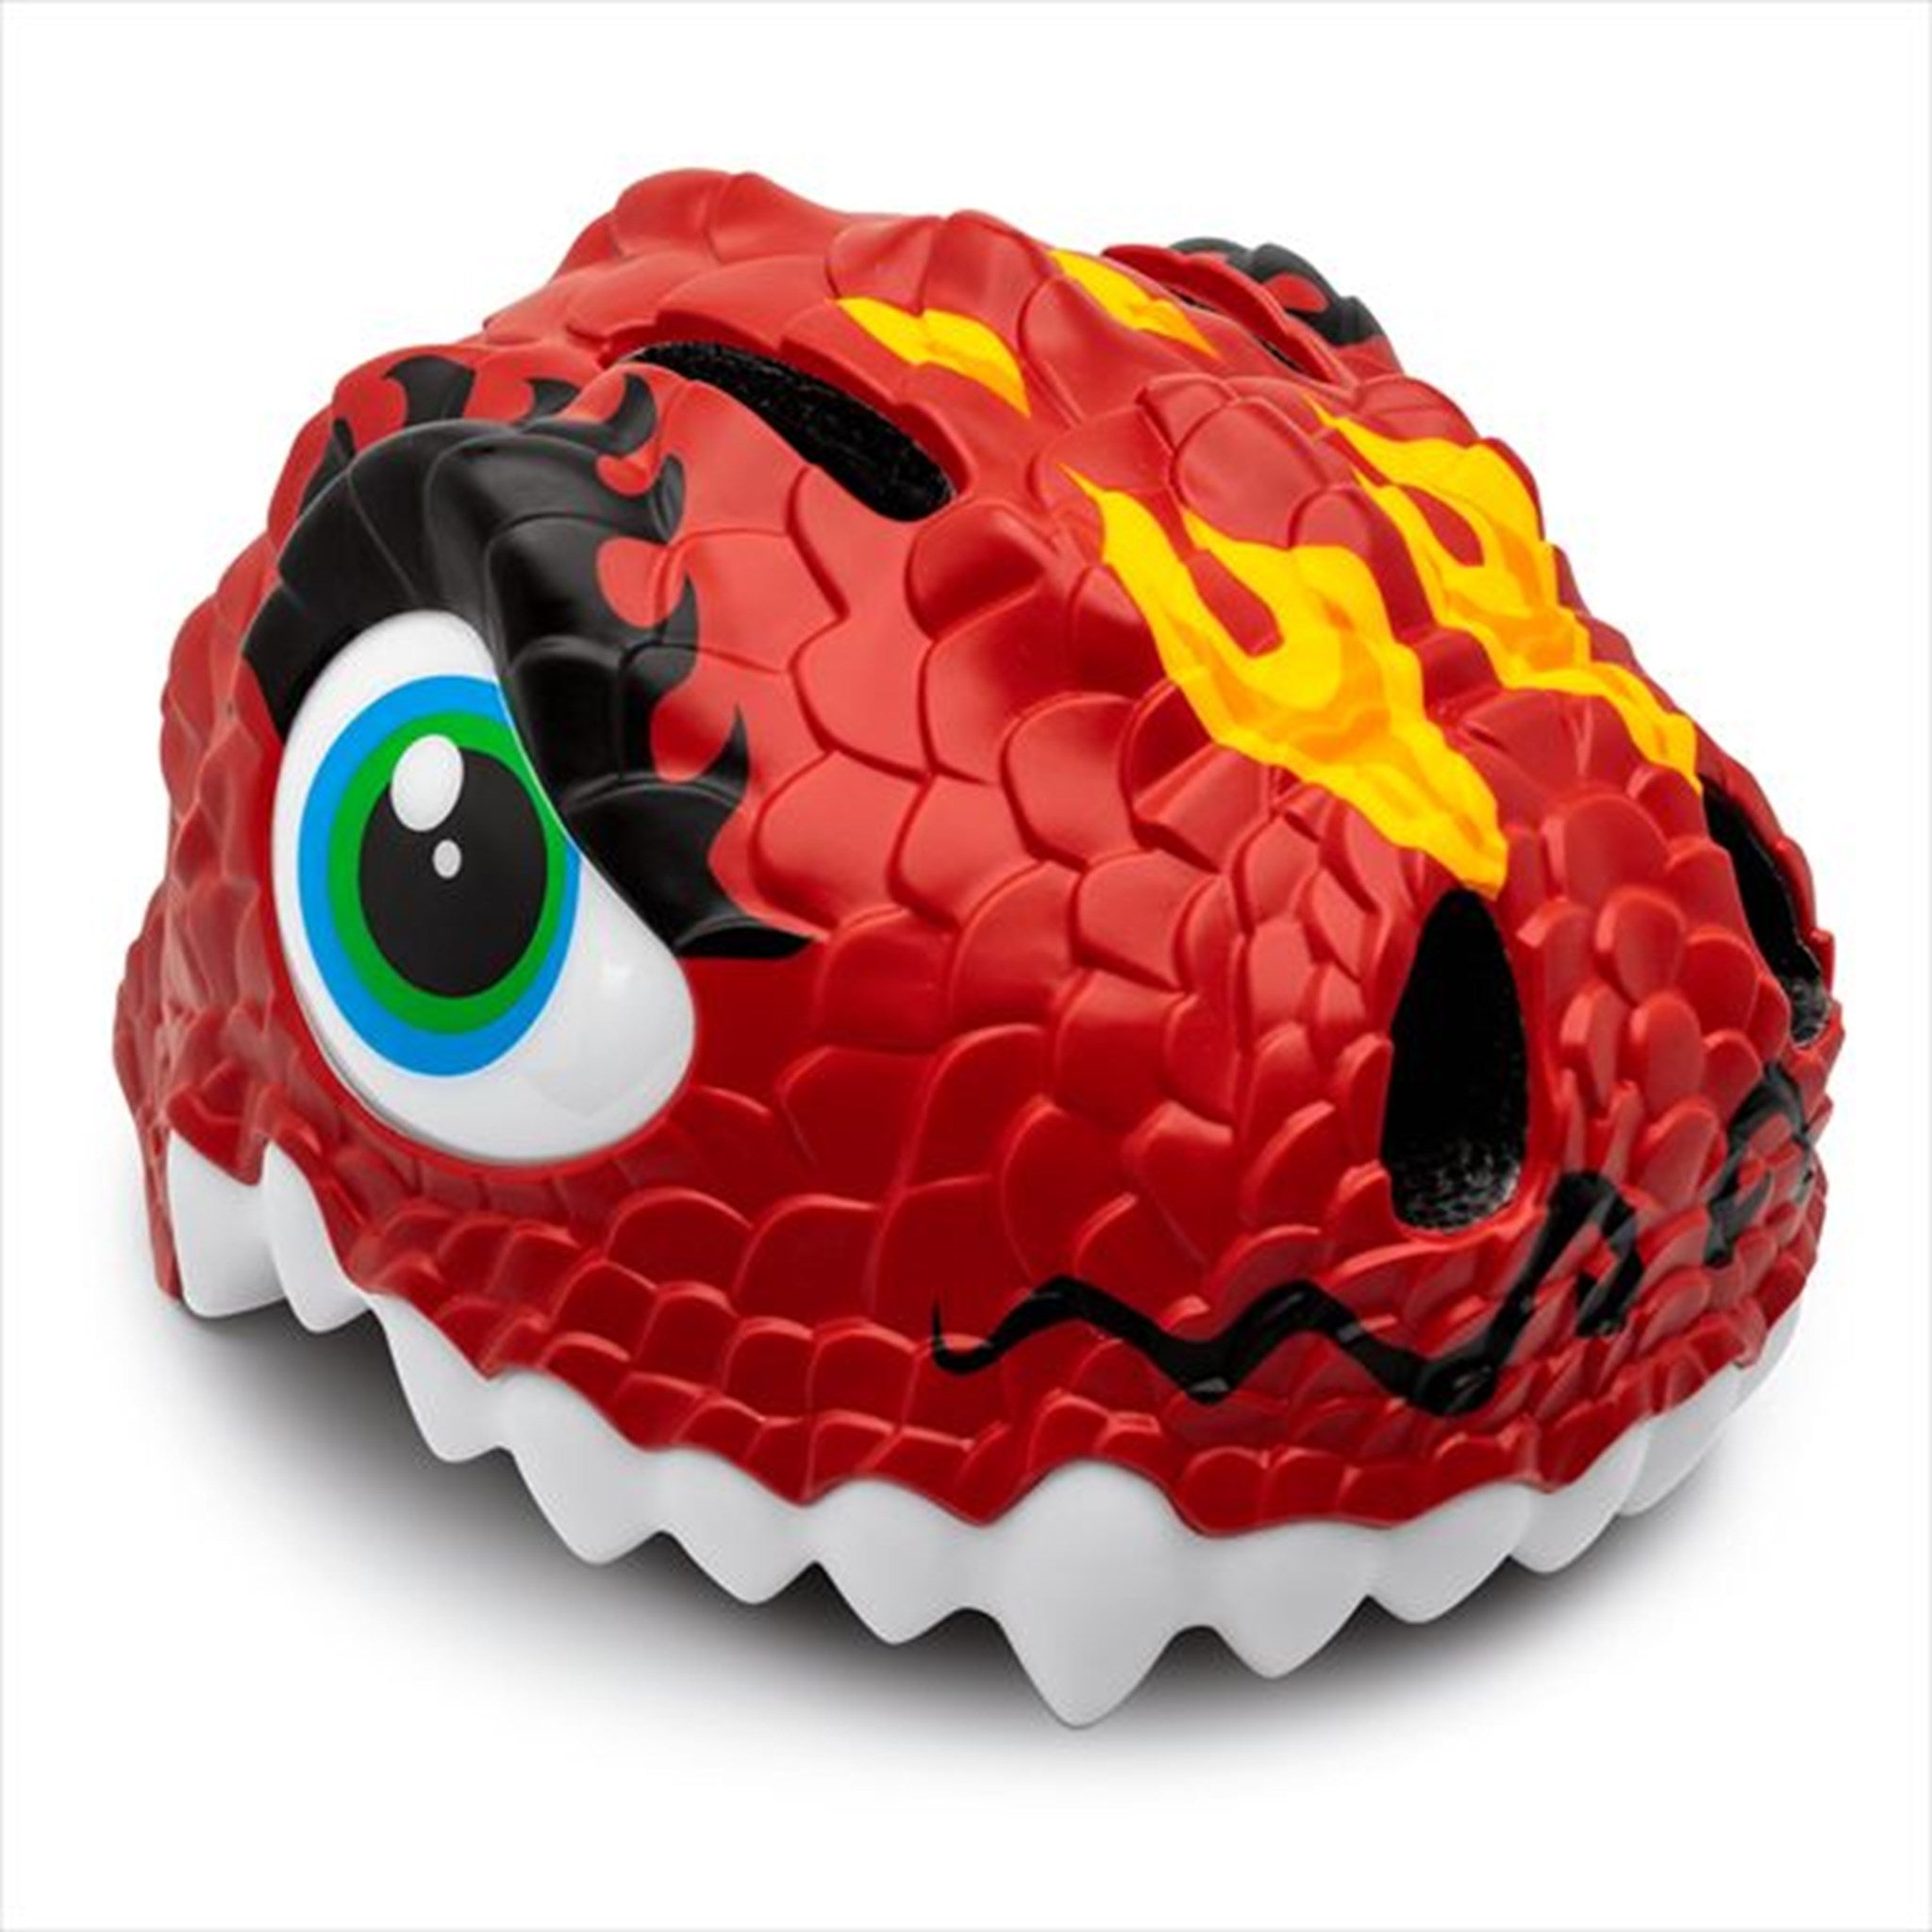 Crazy Safety Chinese Dragon Bicycle Helmet Red